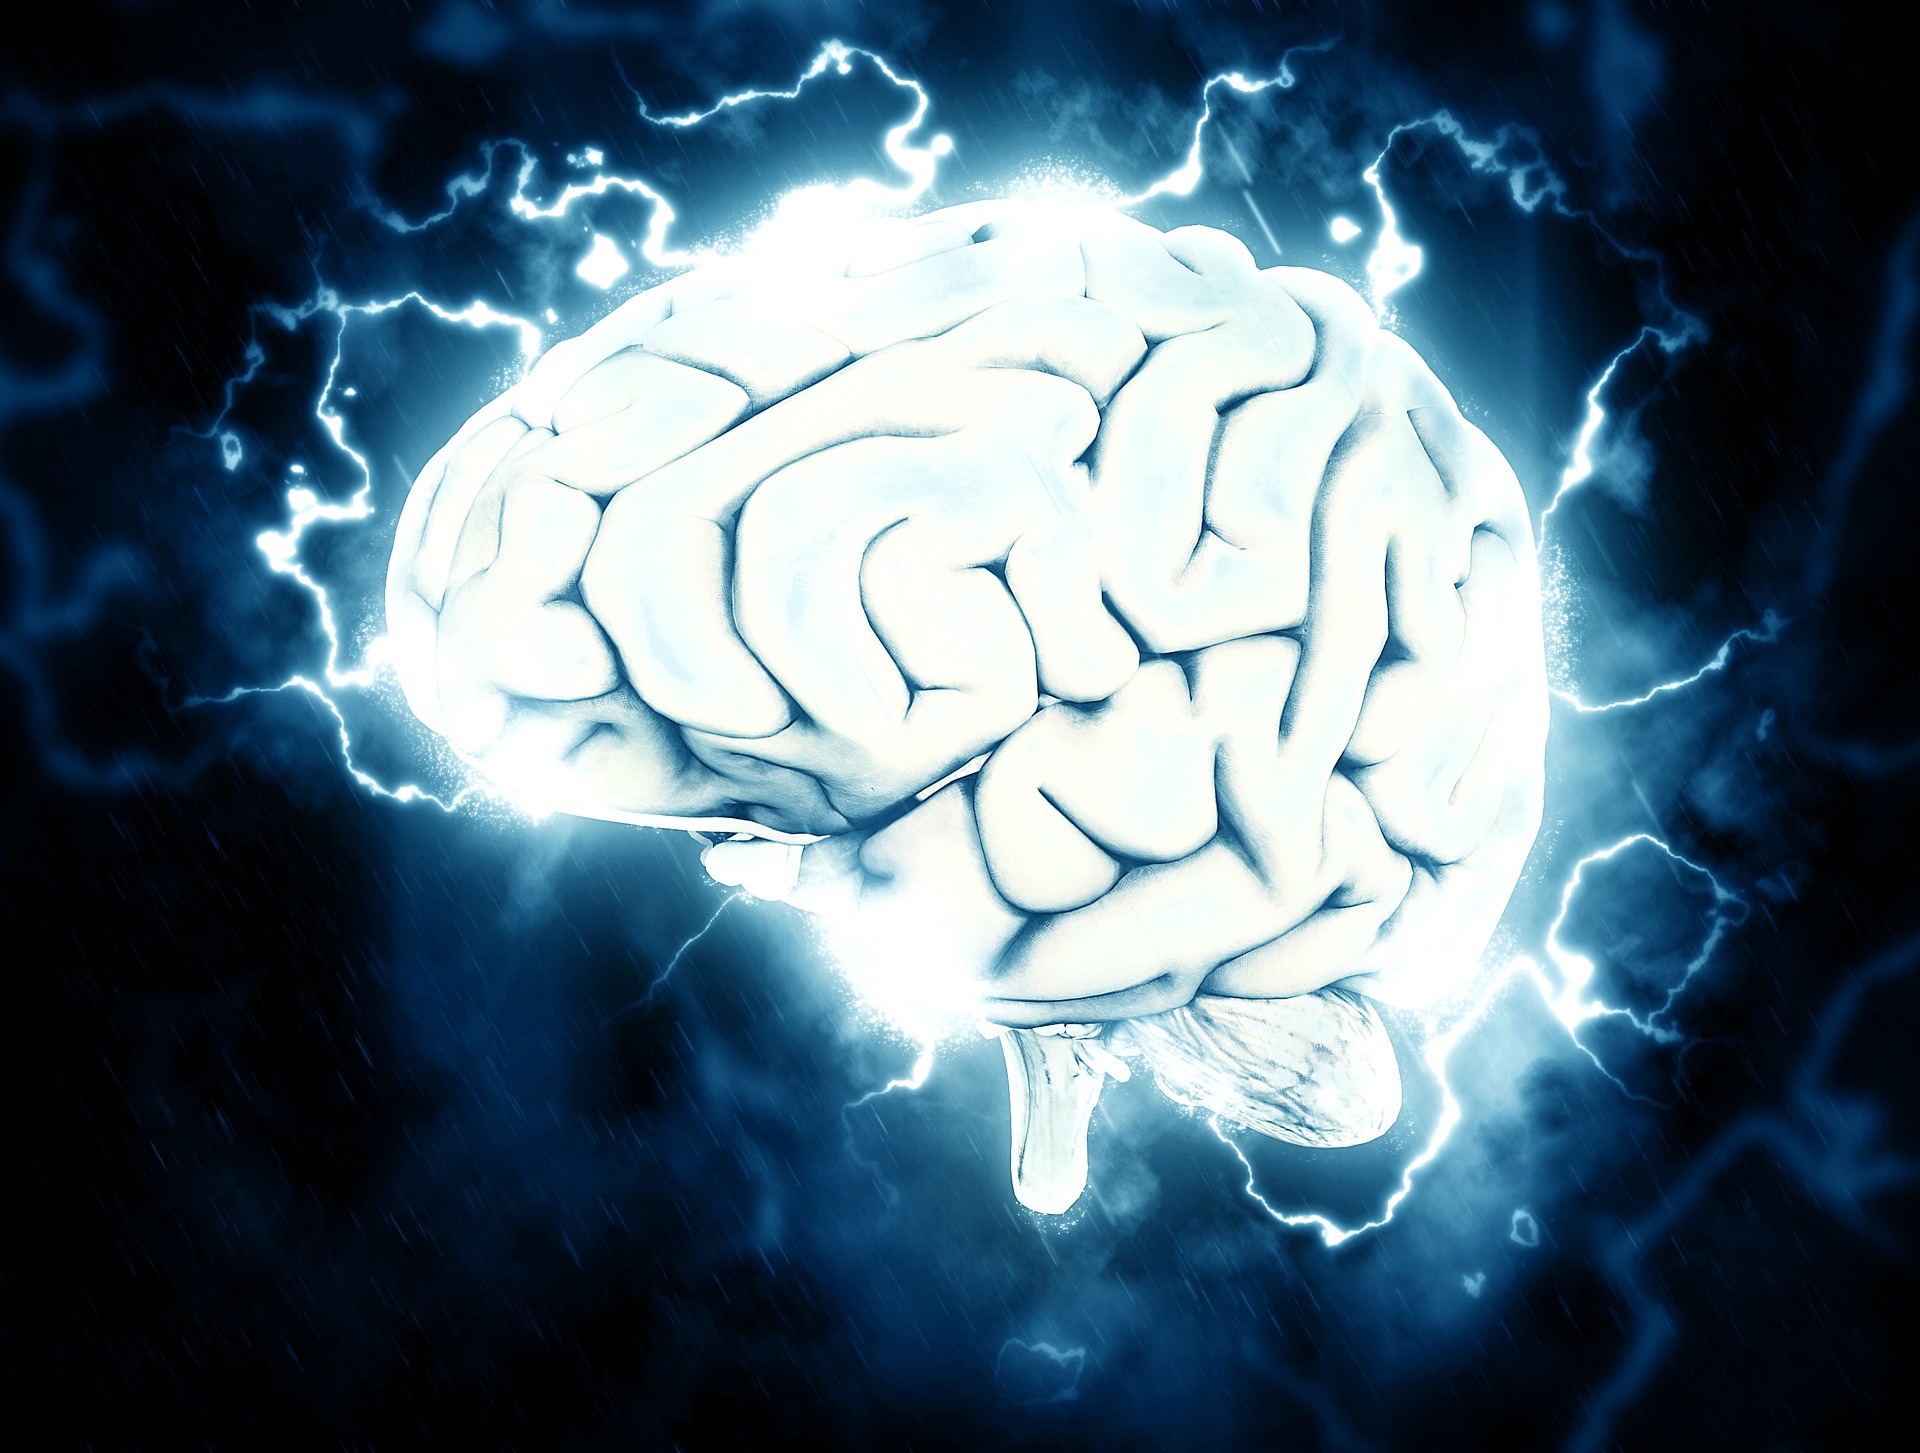 A brain sparking with electricity.